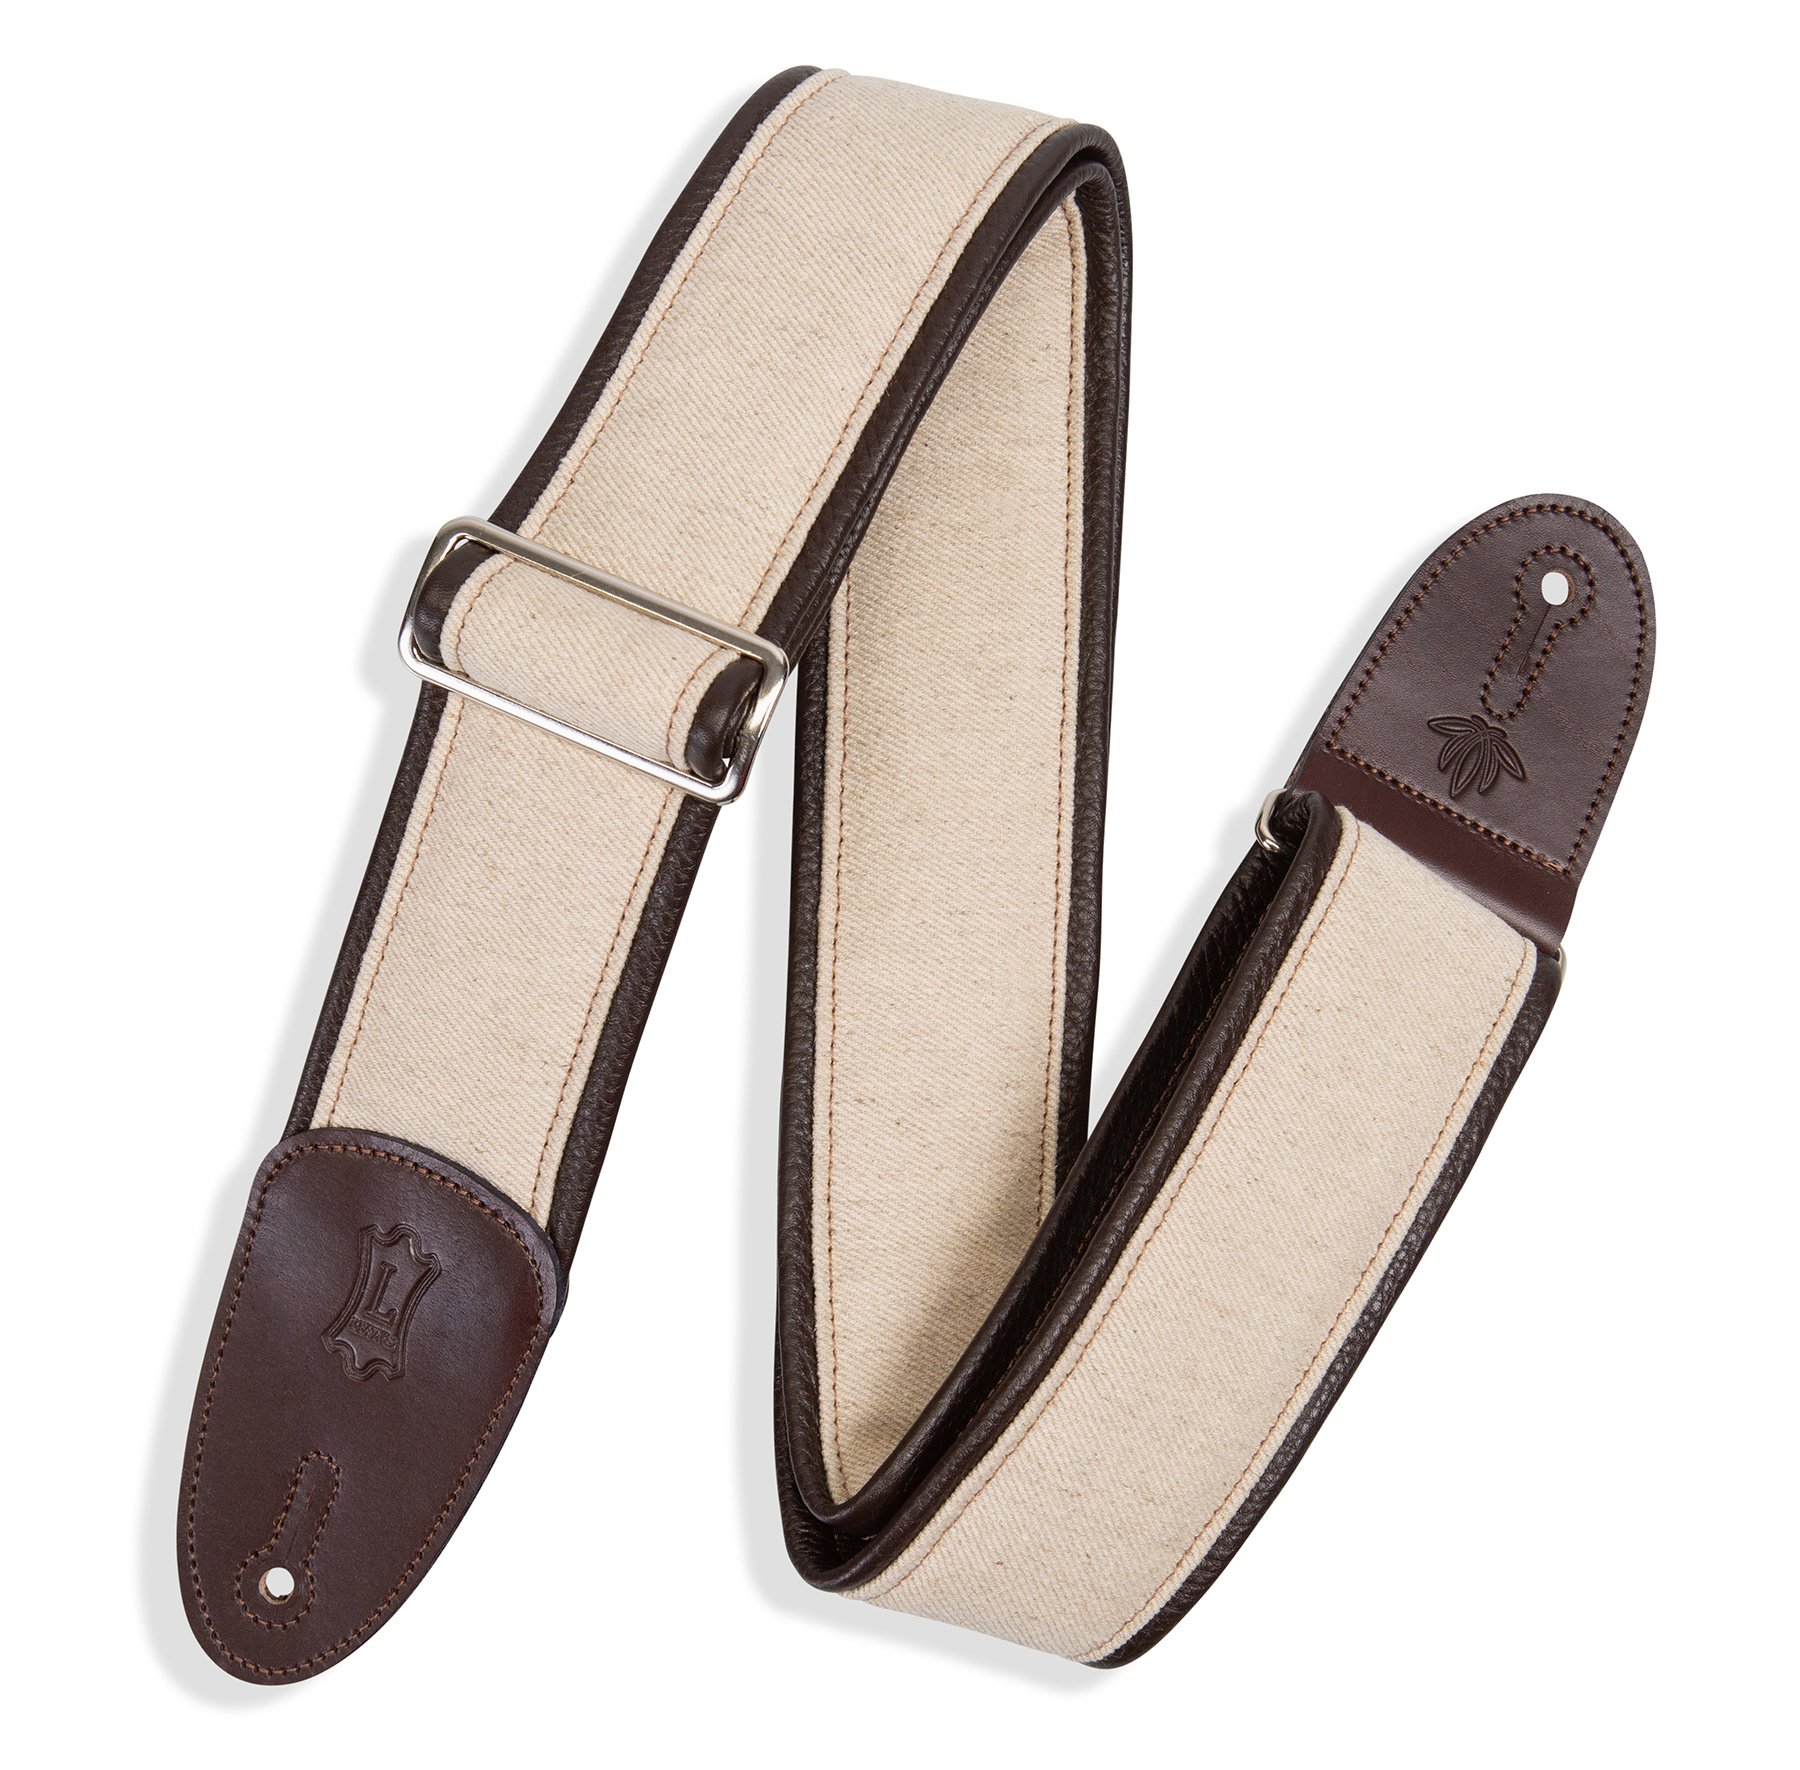 Levy's Levy's 2.5" Natural Hemp Guitar Strap (Brown Garment Leather)